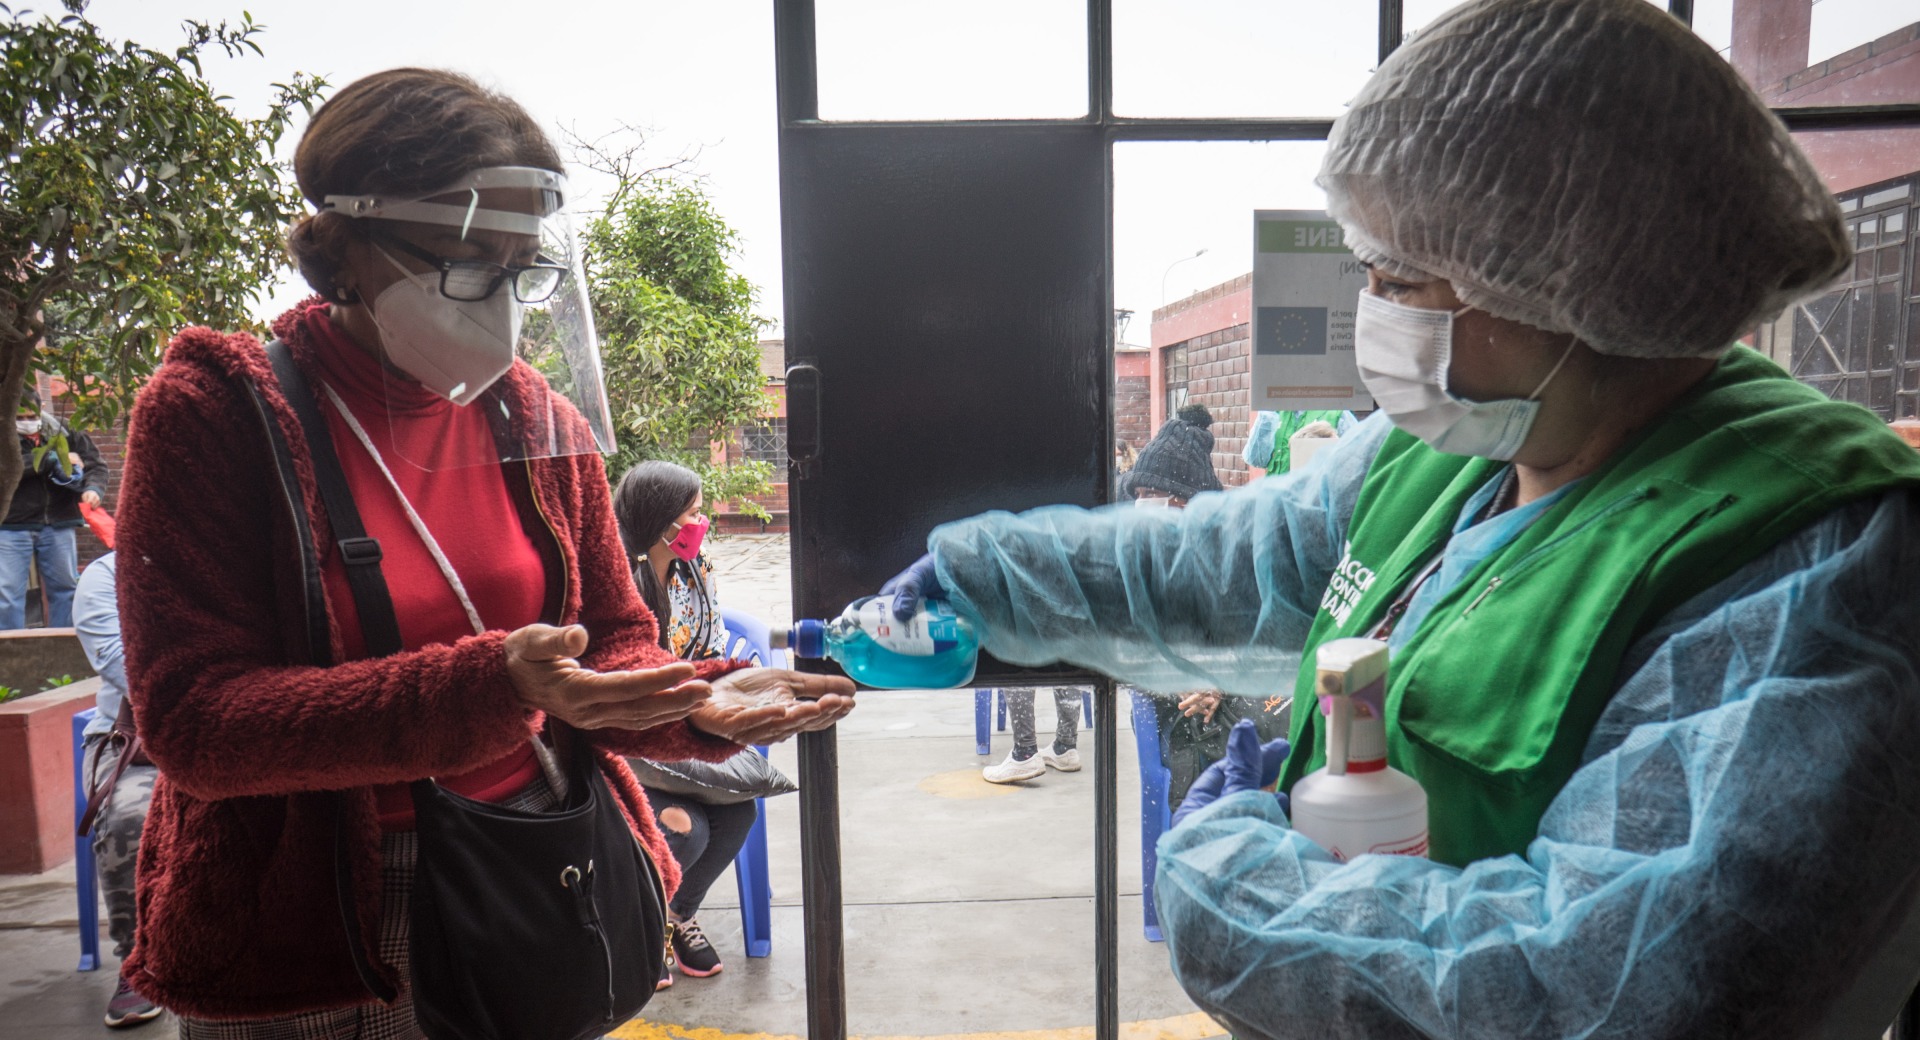 Action Against Hunger's teams in Lima, Peru, provide hand sanitizer for those waiting in line to receive hygiene kits.